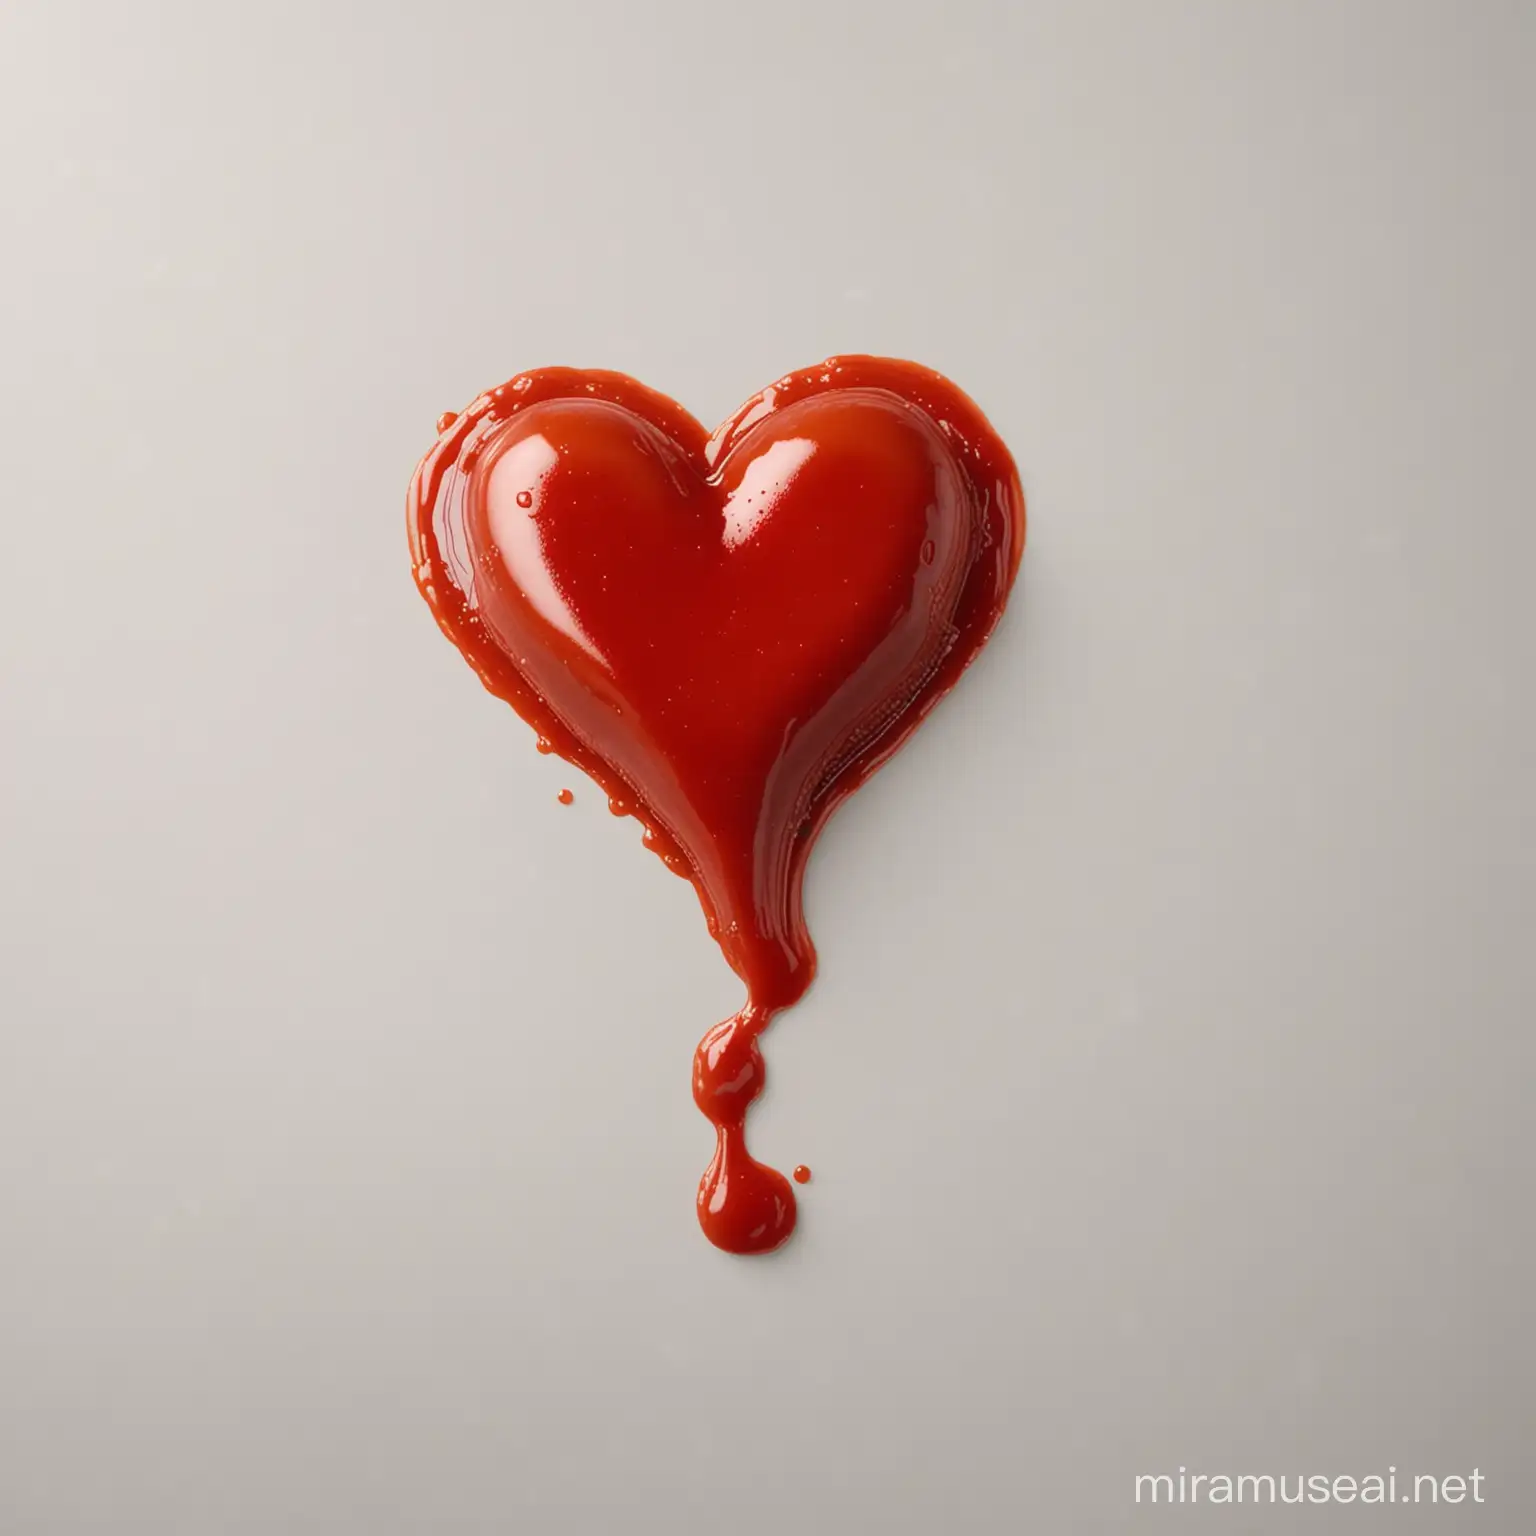 Ketchup spilled in the shape of a heart and a heart form was formed. plain white background